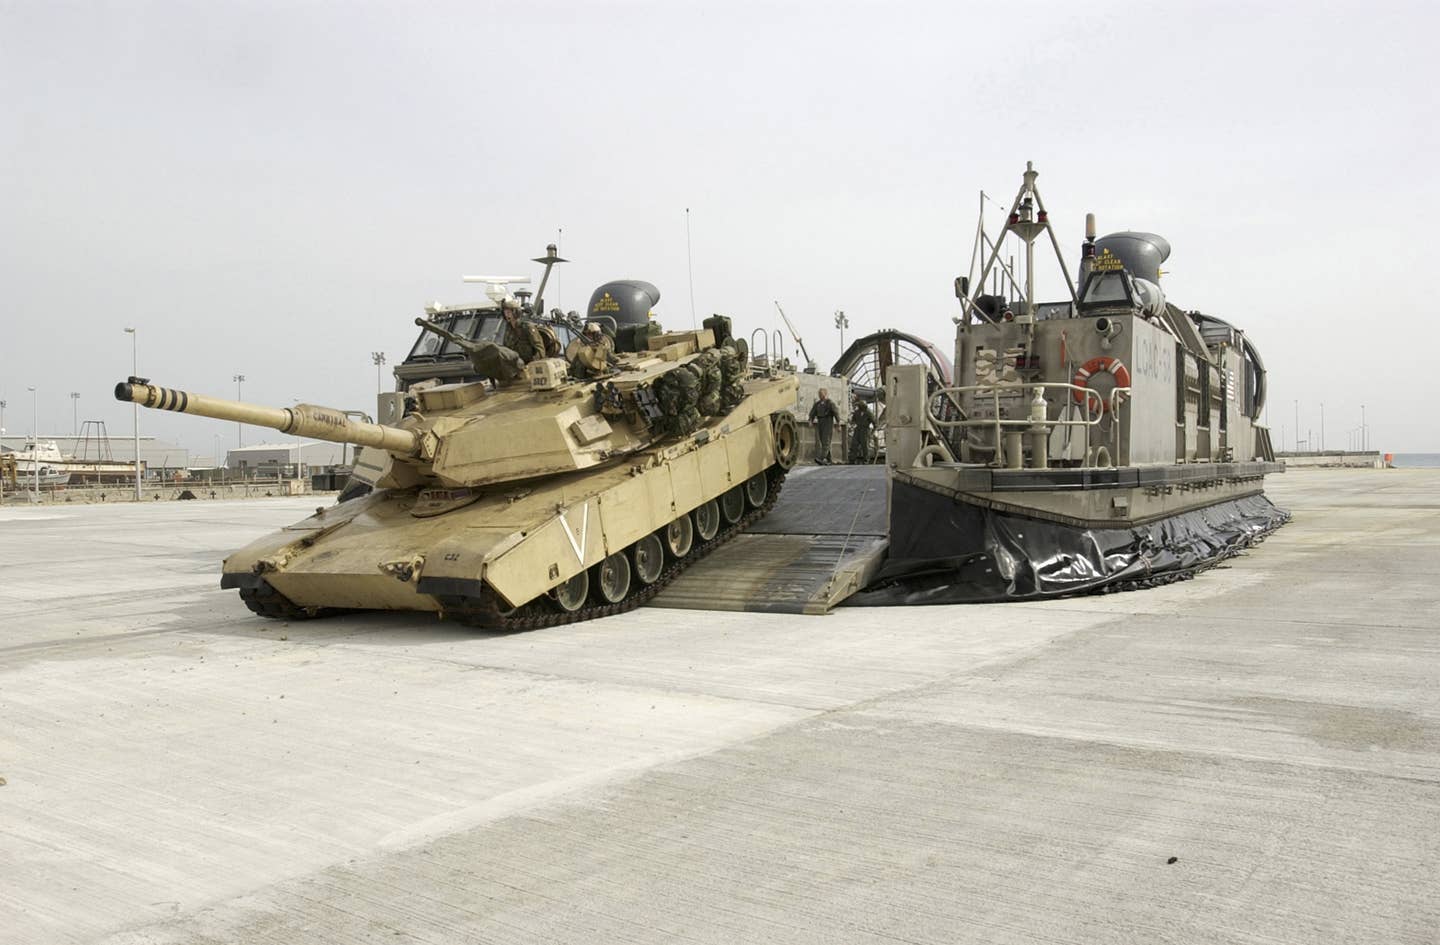 A USMC M1 Abrams tank loads onto an LCAC in San Diego. After a long history of heavy armor operations, the Marines are out of the tank business in order for its force mix to align with its new strategy. U.S. Navy photo by Photographer's Mate 1st Class Brien Aho.